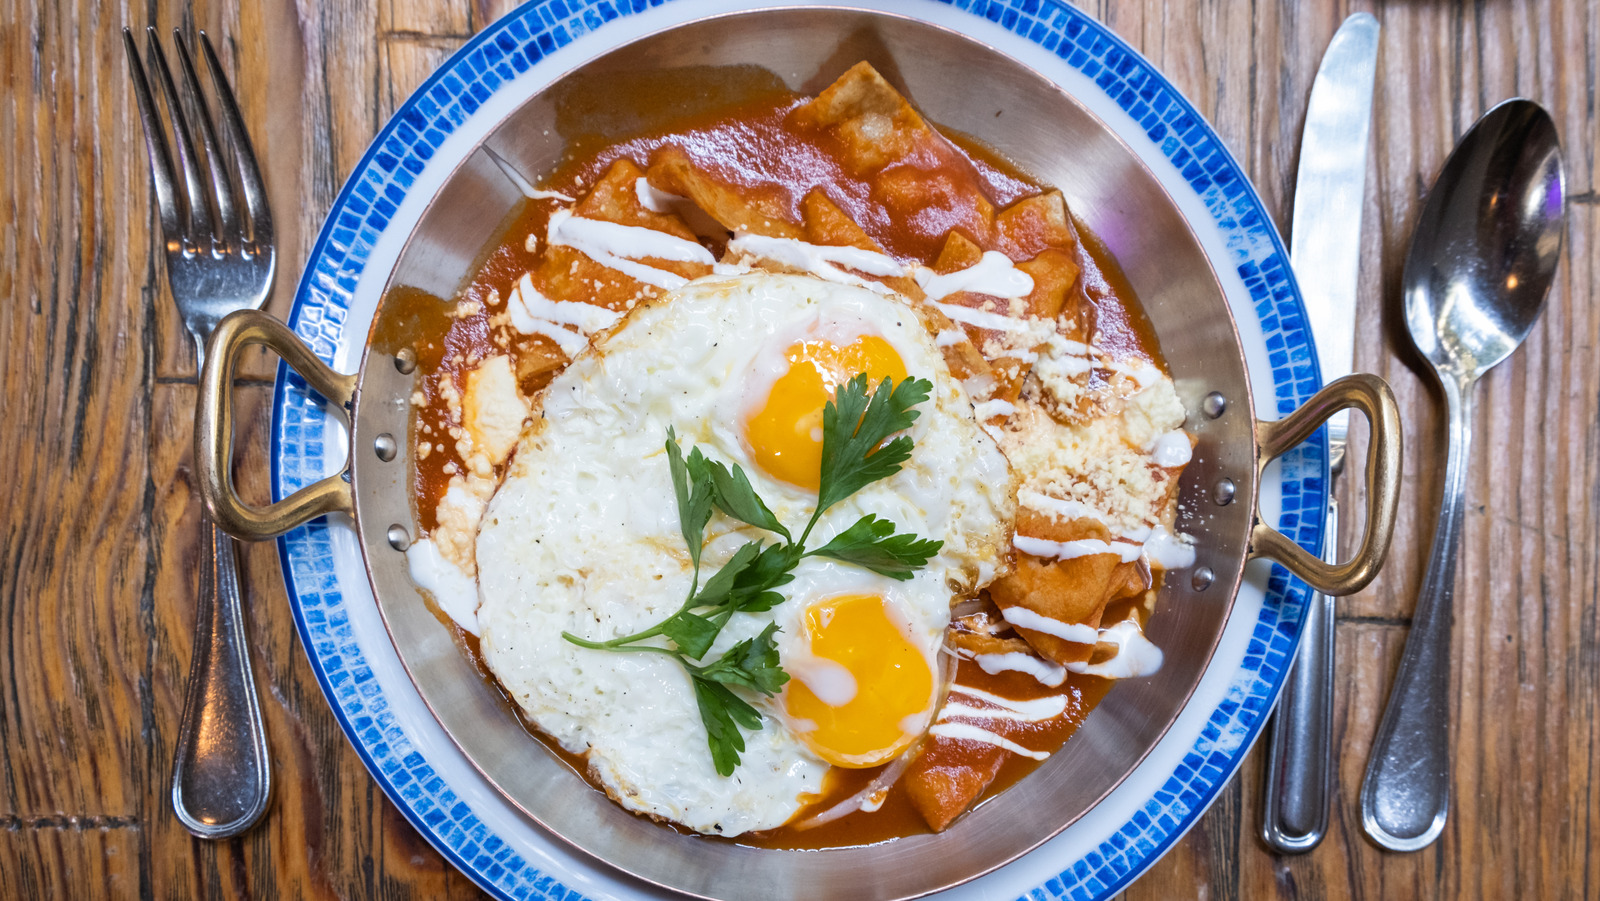 https://www.foodrepublic.com/img/gallery/enchilada-sauce-is-all-you-need-to-revamp-fried-eggs/l-intro-1699373579.jpg